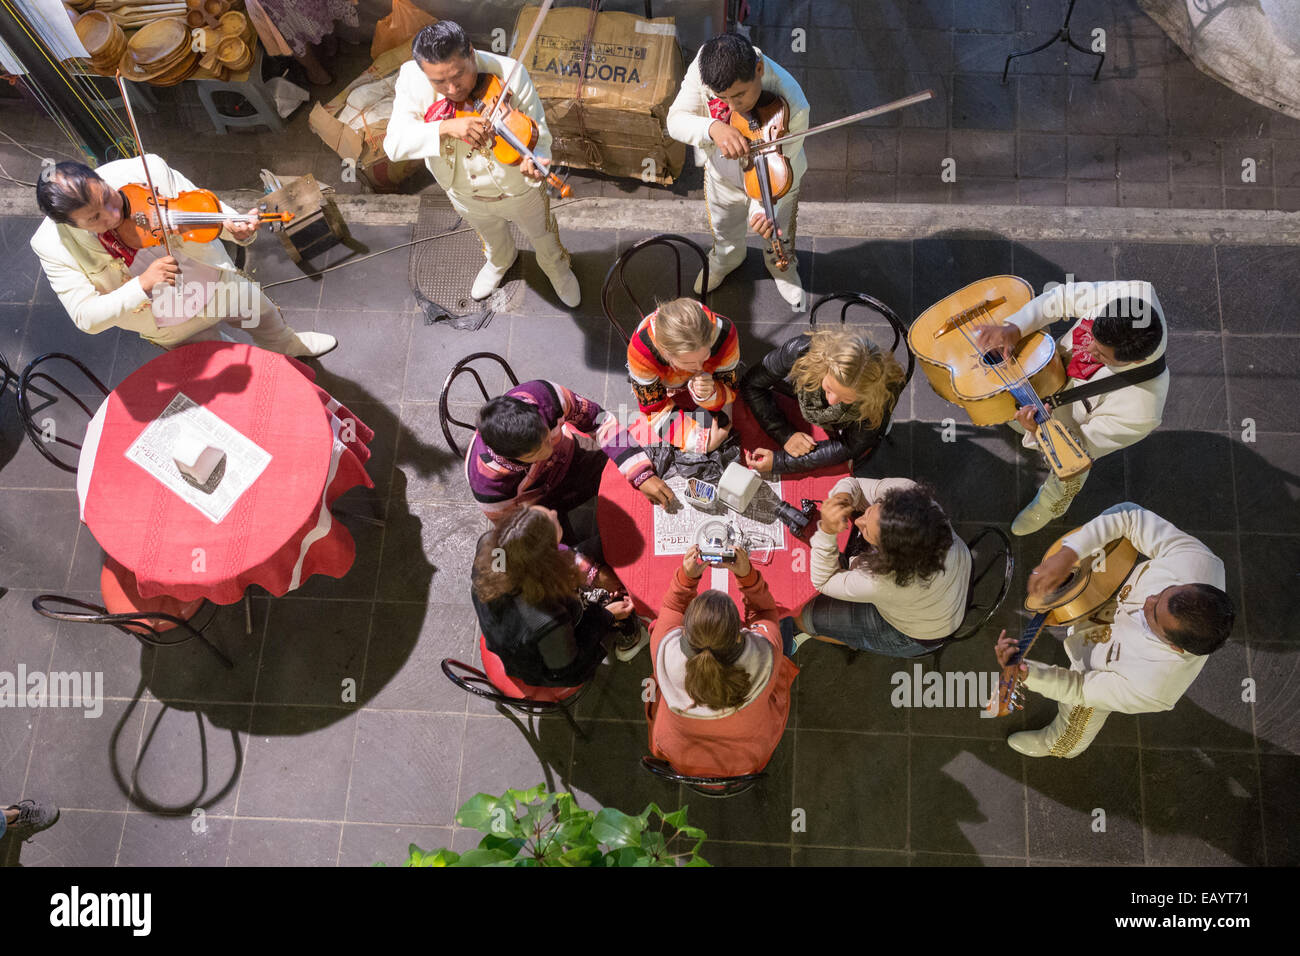 A mariachi band plays for tourists in the Zocalo or town square in Oaxaca, Mexico. Stock Photo